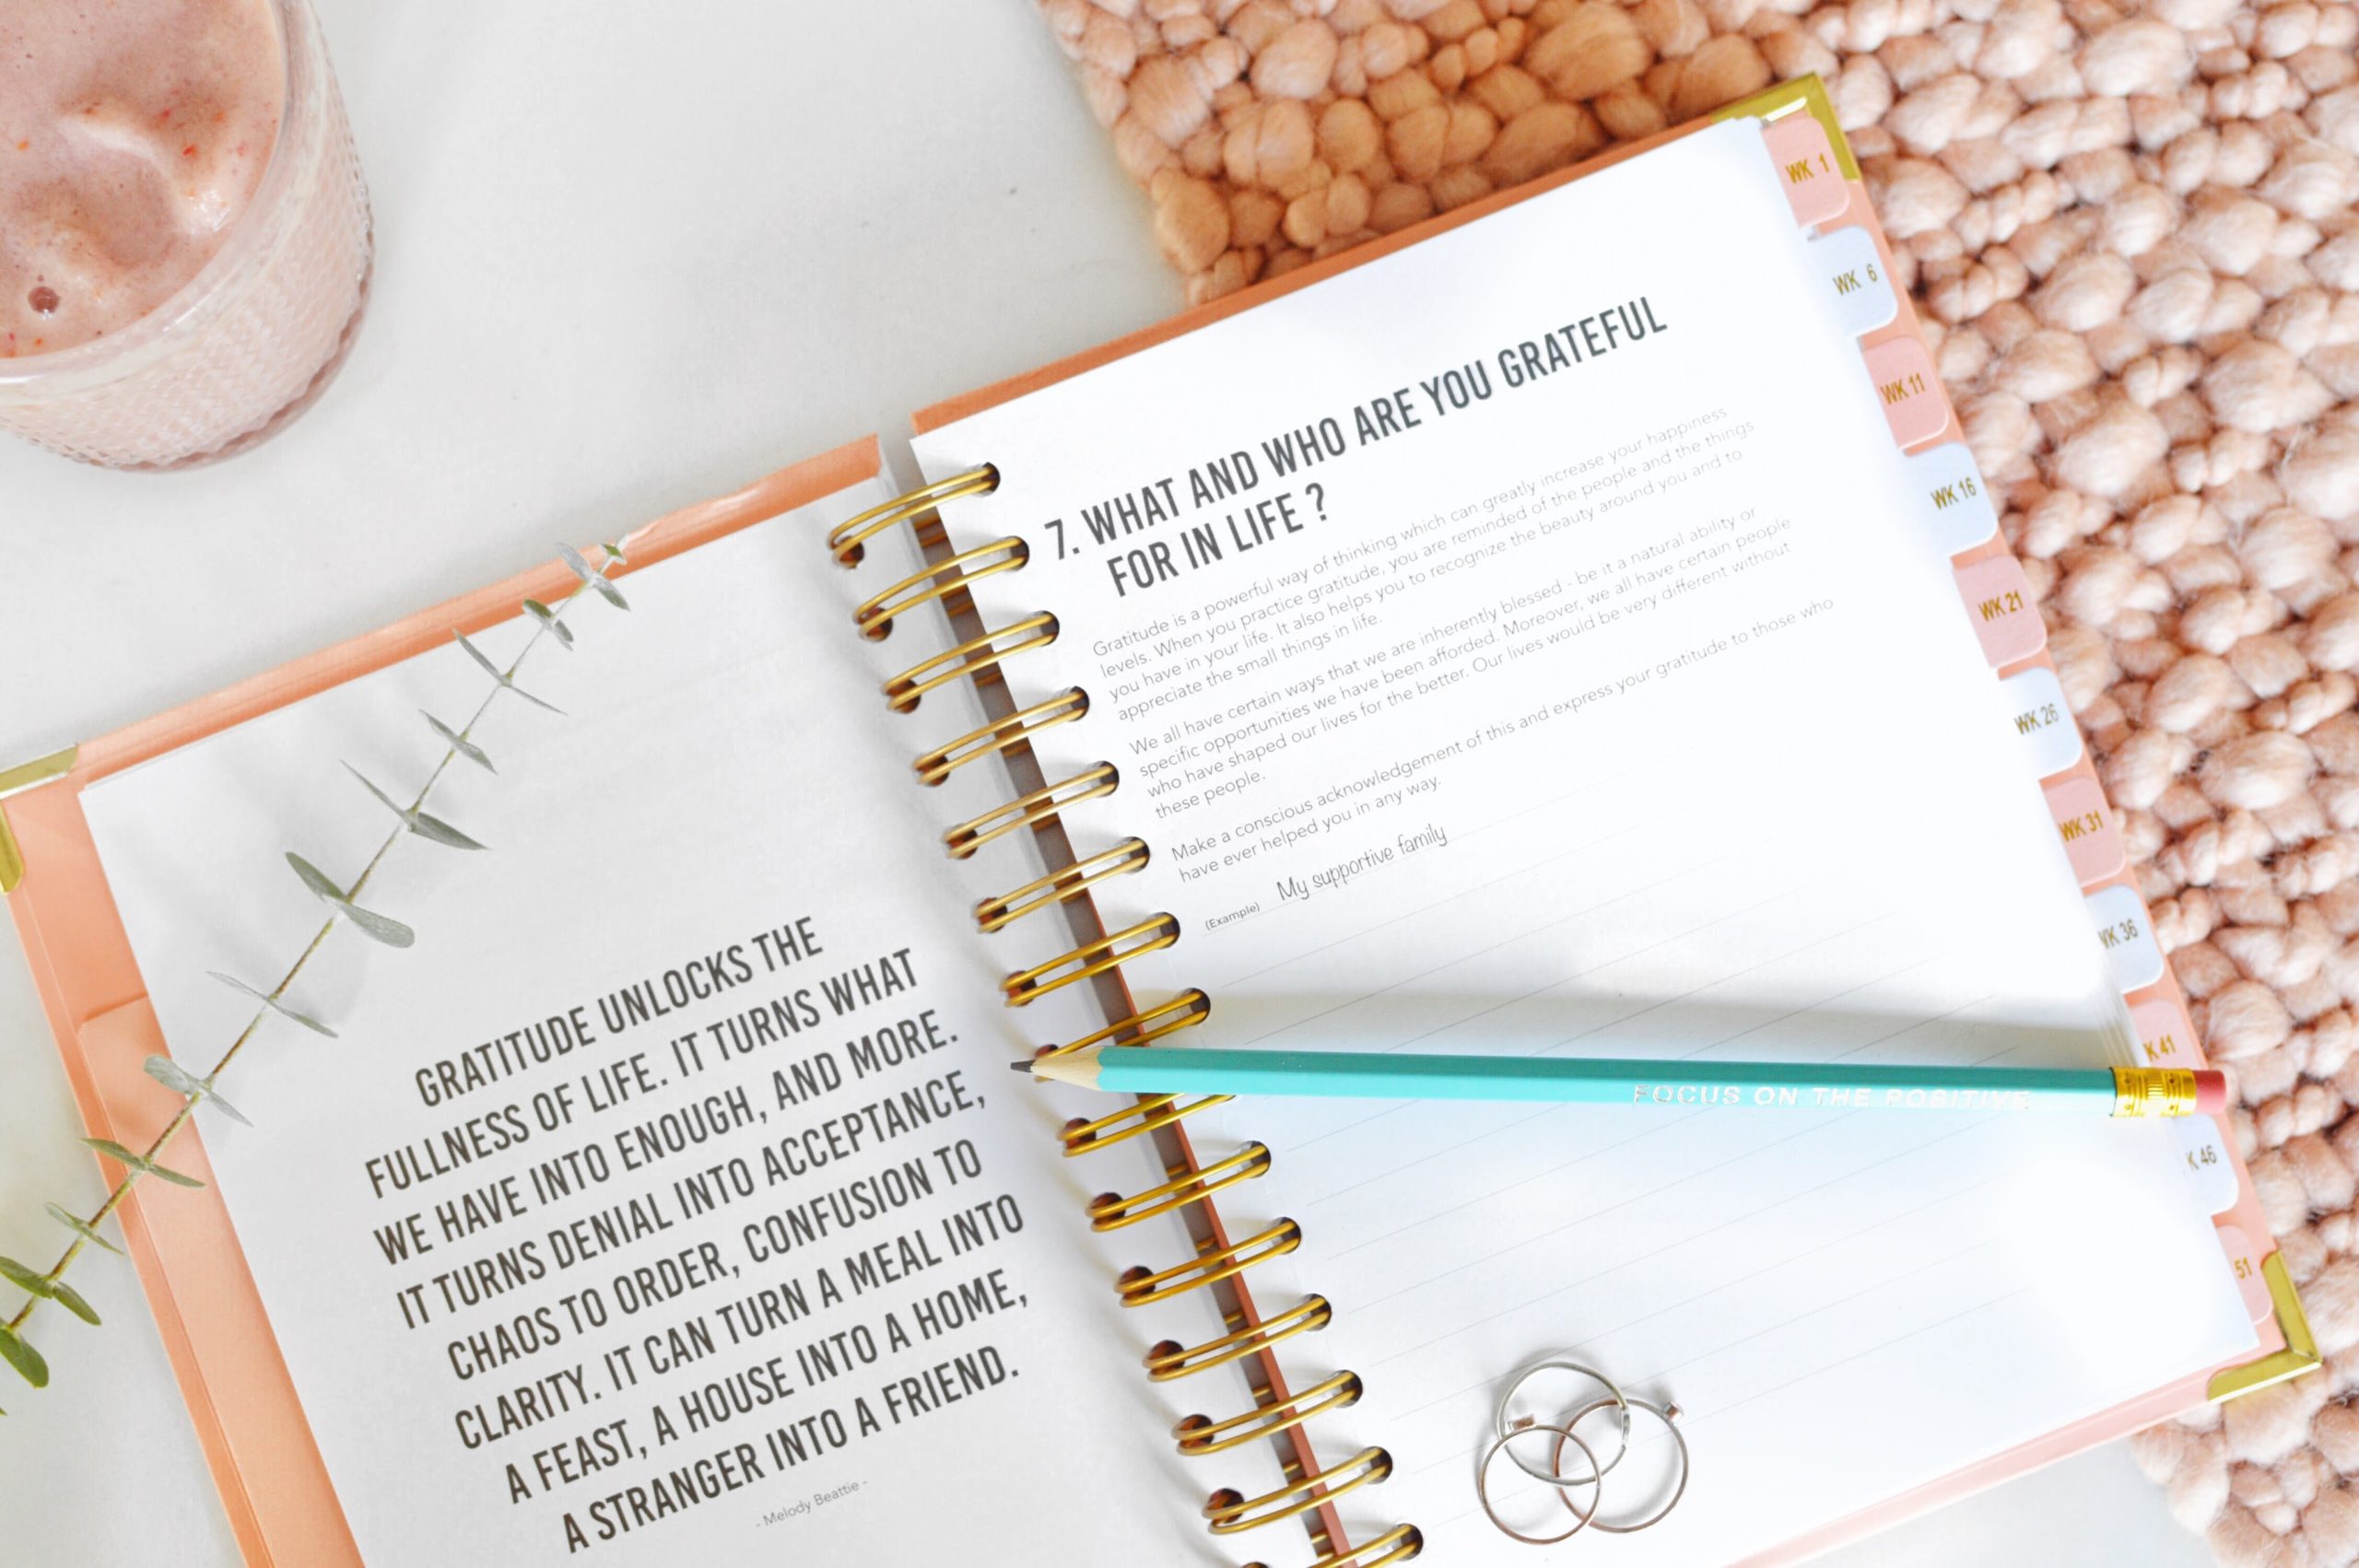 Your 5-Minute Journal : Find Gratitude and De-Stress with Simple